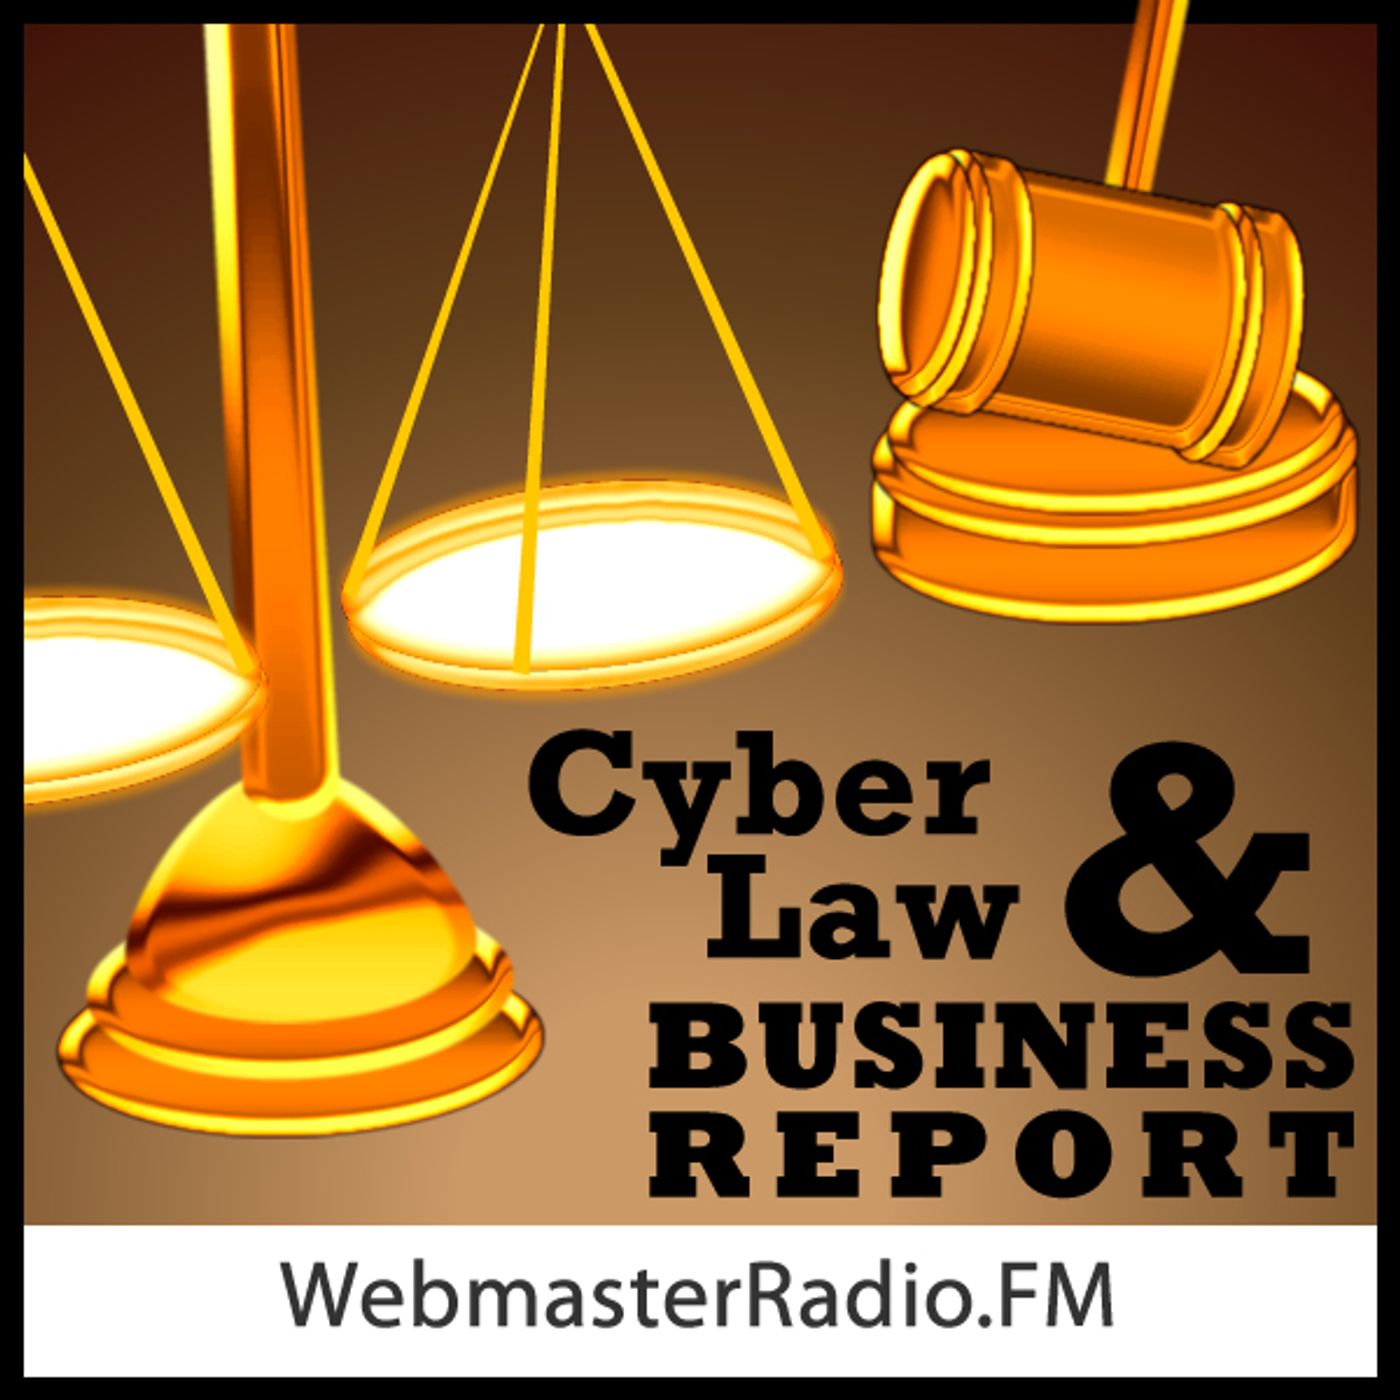 CyberLaw and Business Report's 7th Cyber Thanksgiving Special